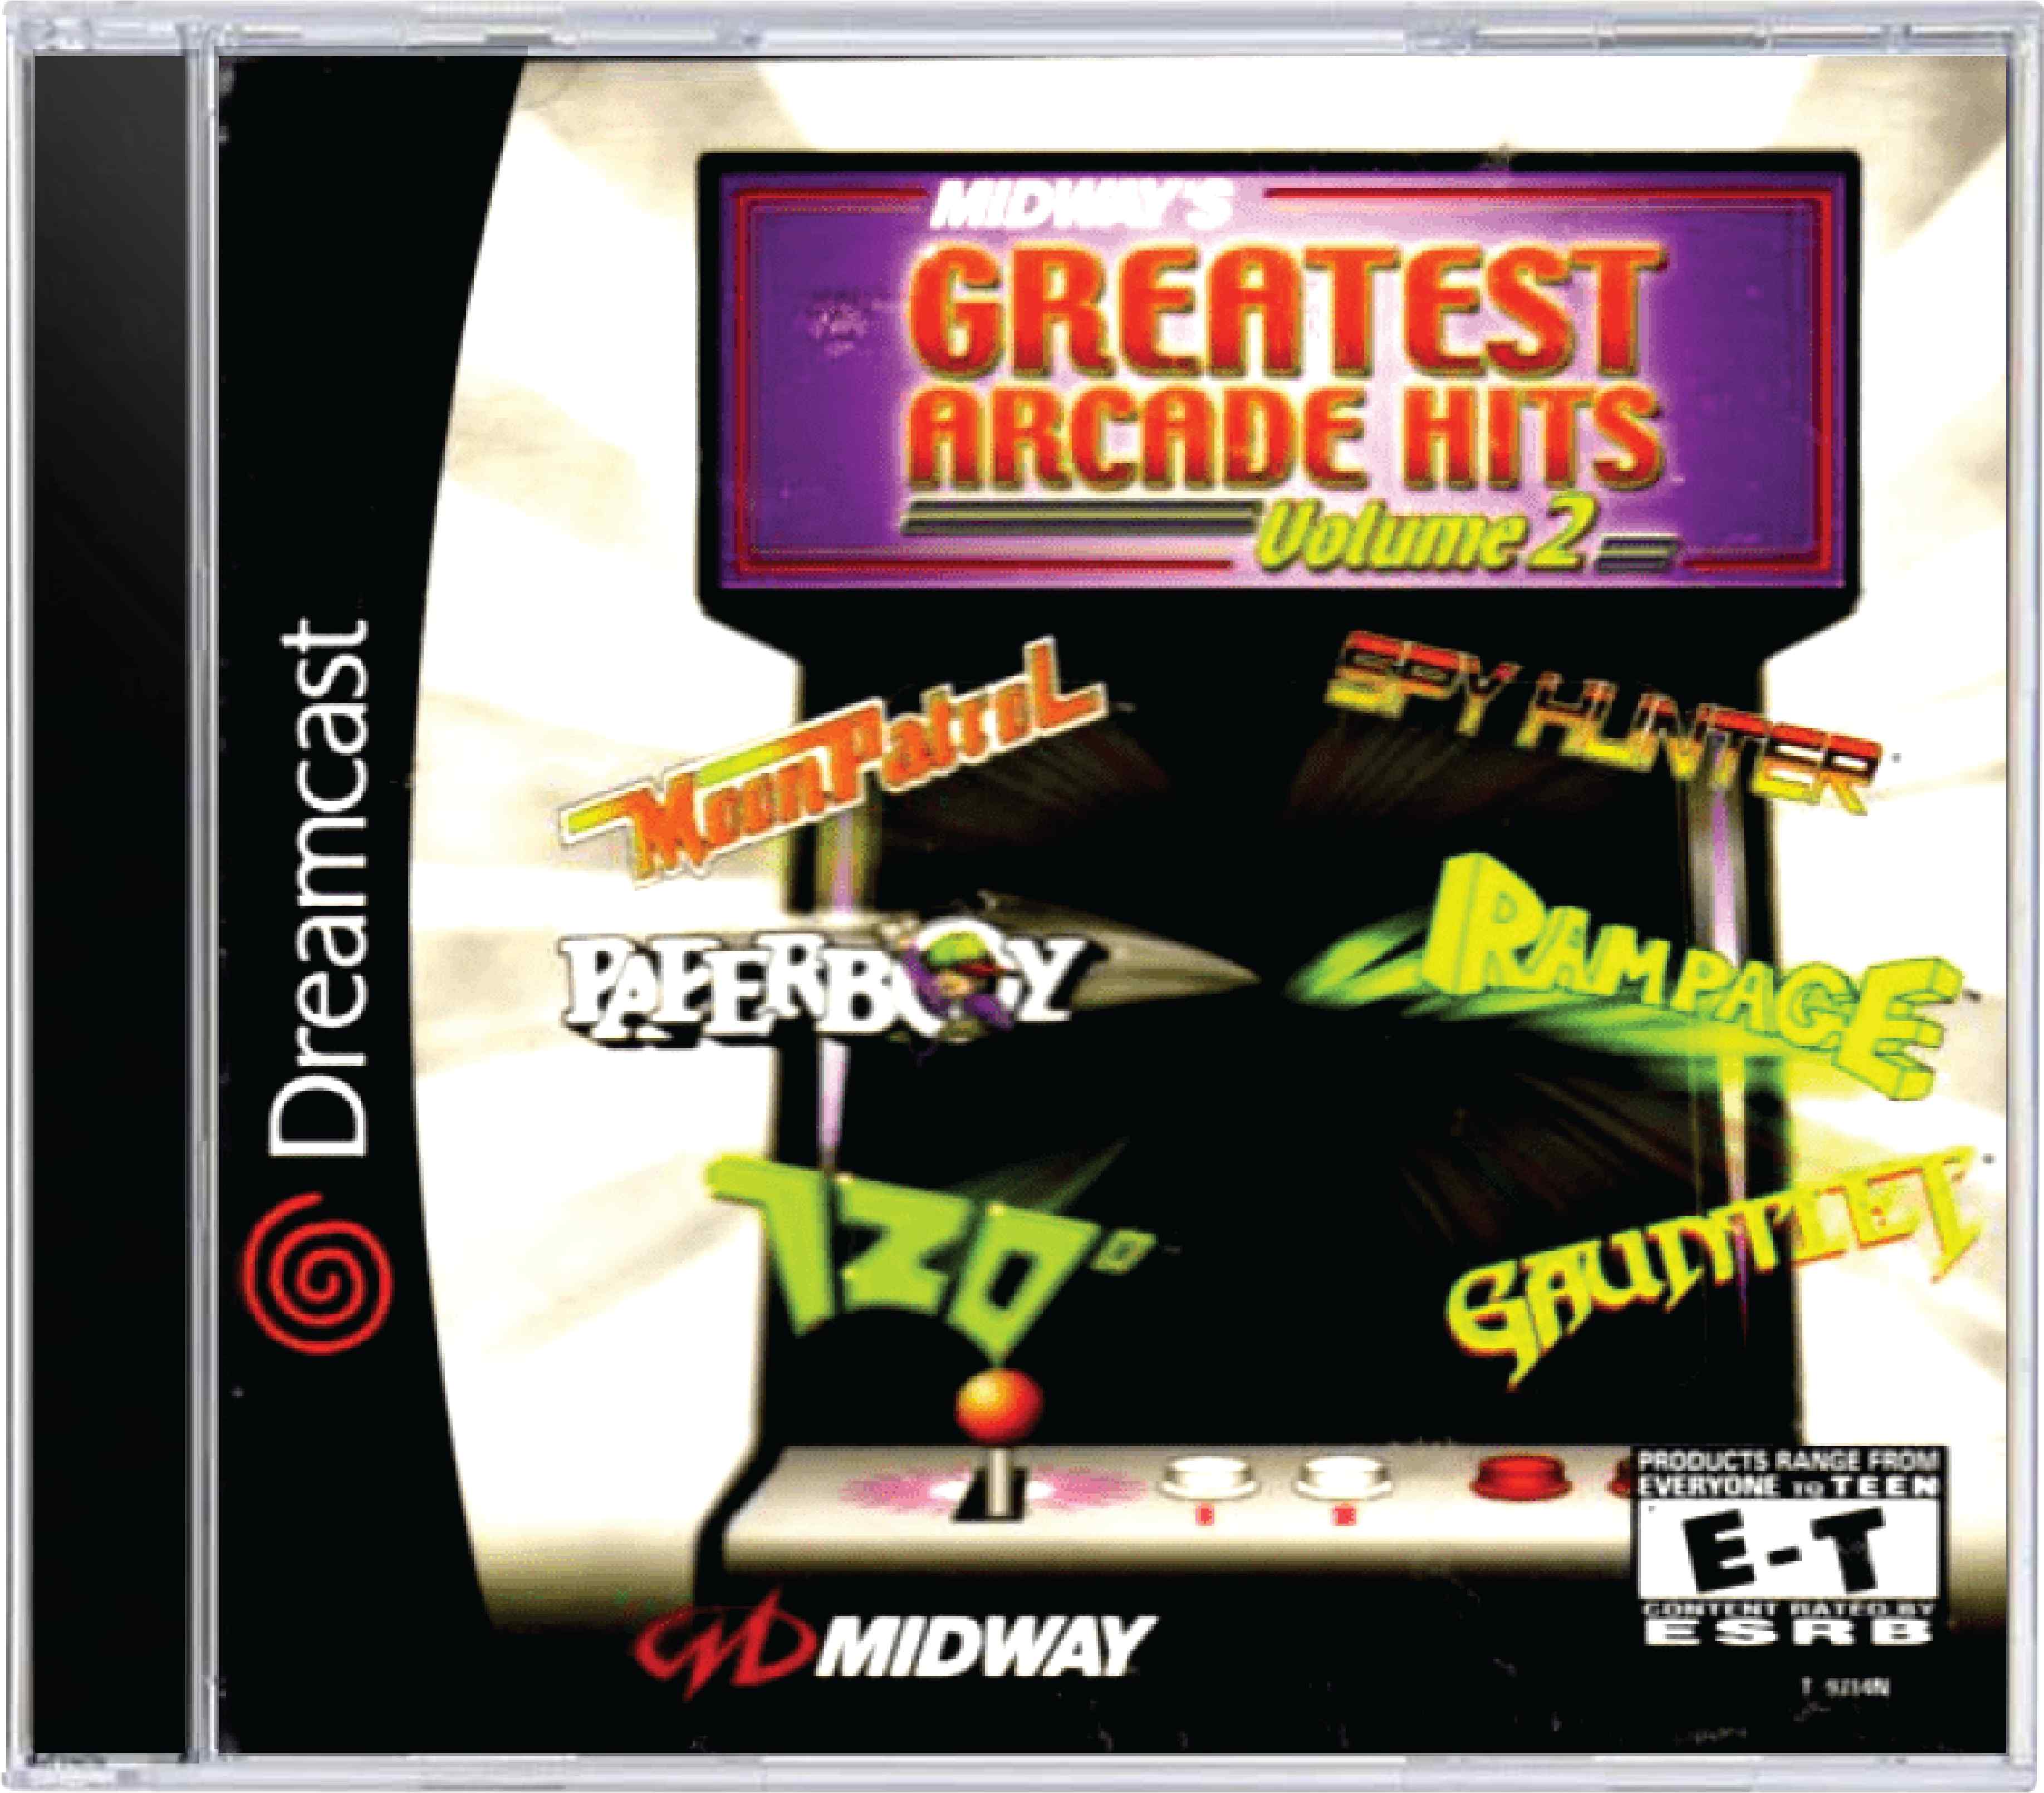 Midway's Greatest Arcade Hits Volume 2 Cover Art